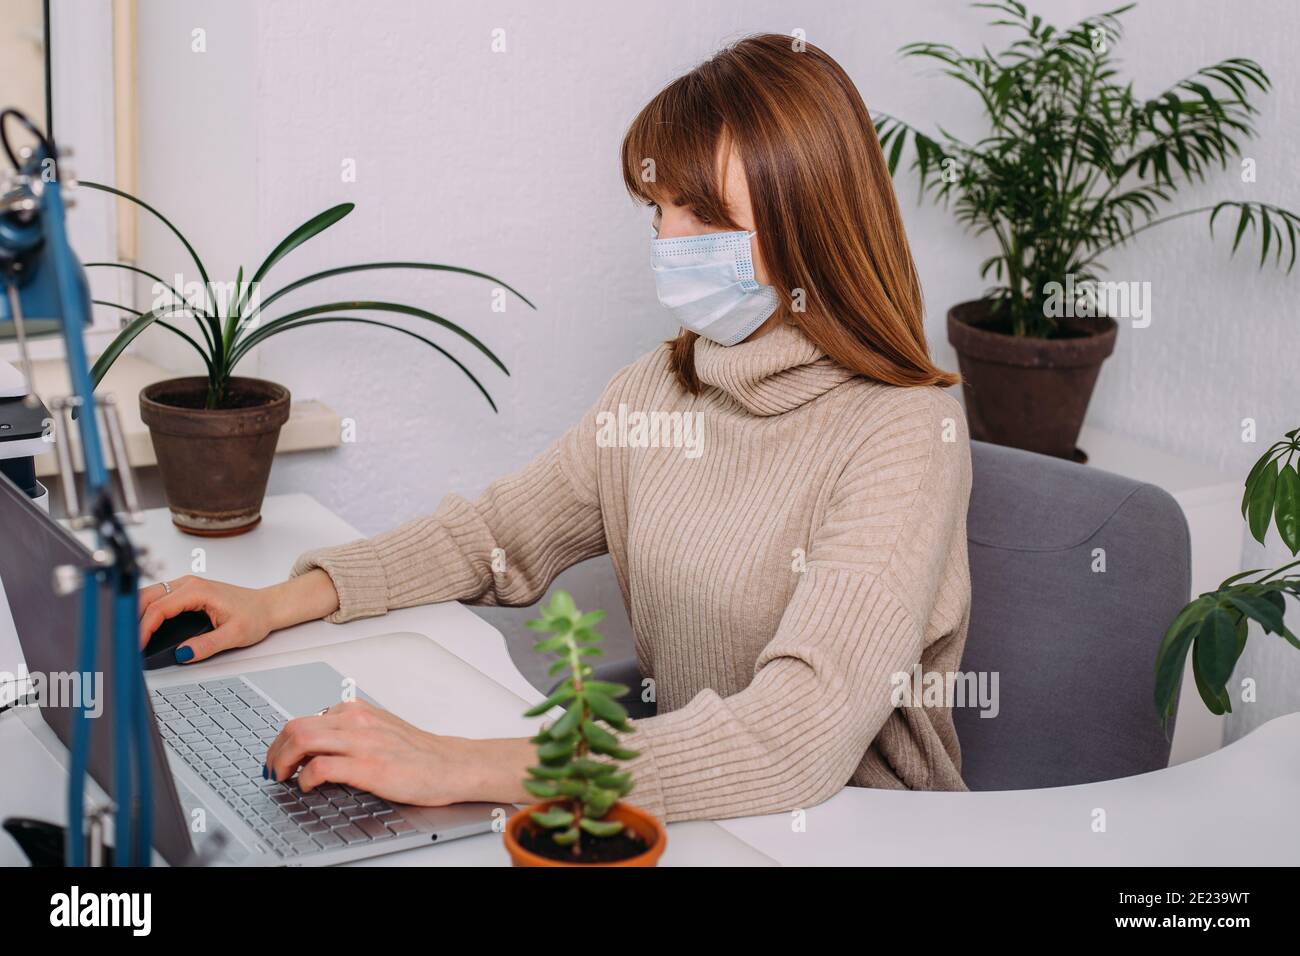 Beautiful business woman with a medical mask working in a light office surrounded by plants. Covid-19 concept. Stock Photo